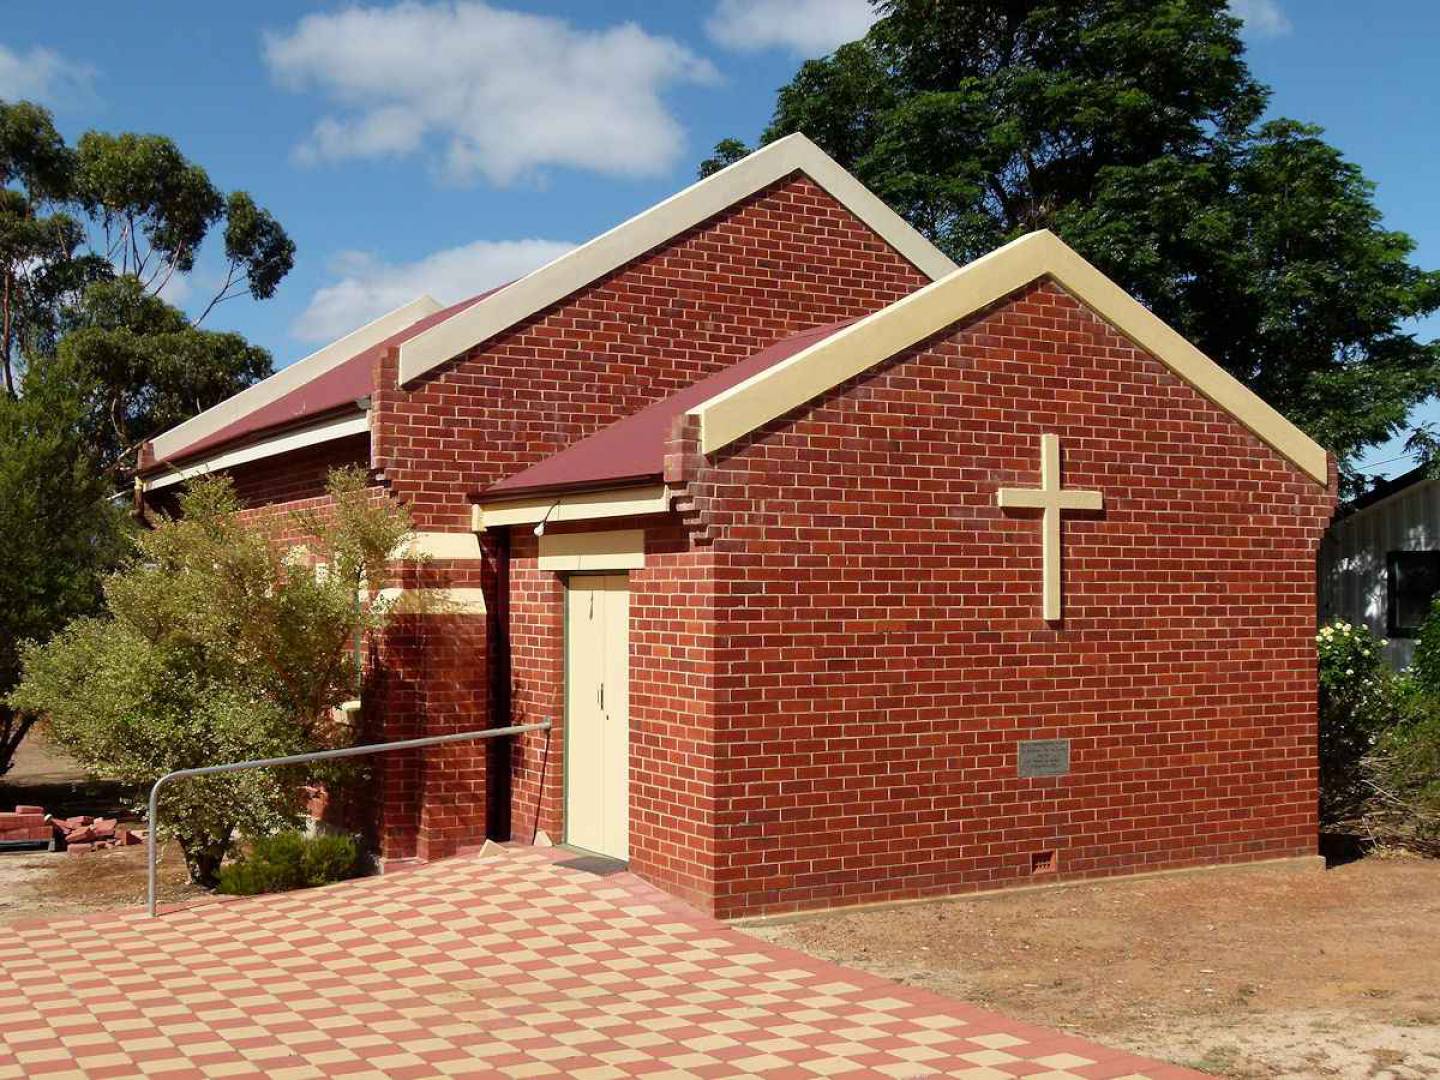 St Augustine's Anglican Church